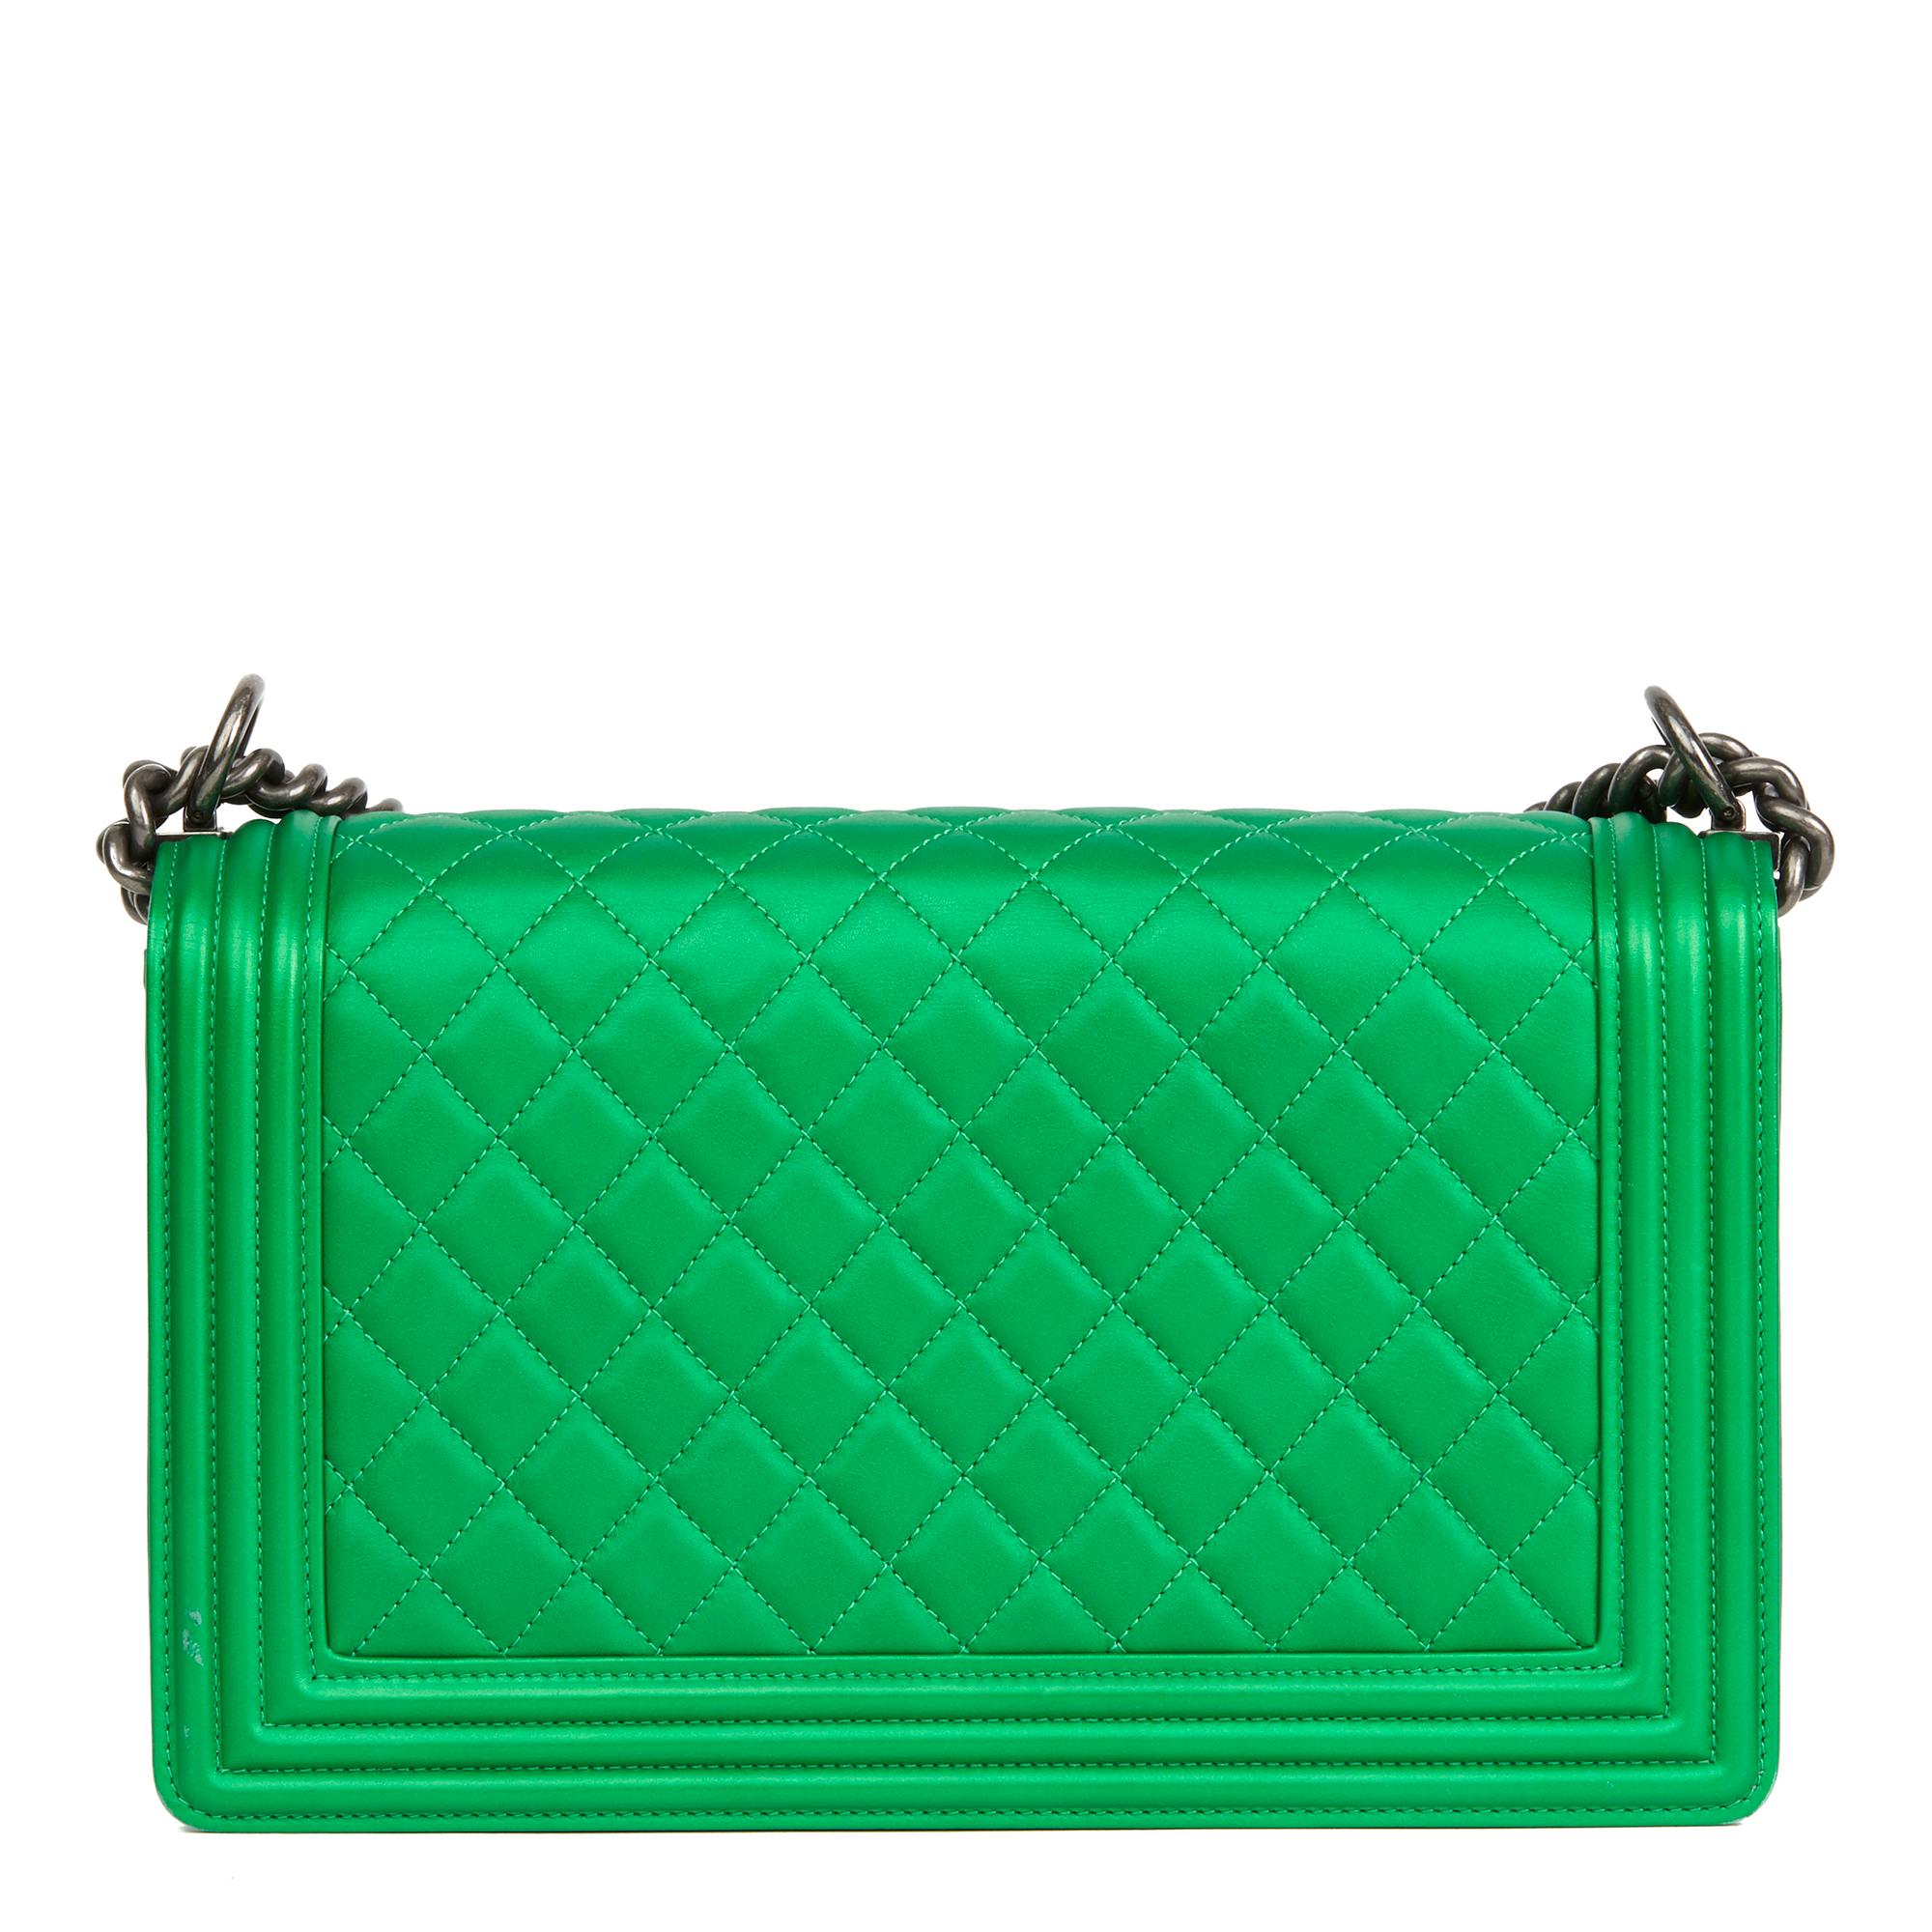 Women's 2015 Chanel Green Quilted Metallic Lambskin Leather New Medium Le Boy